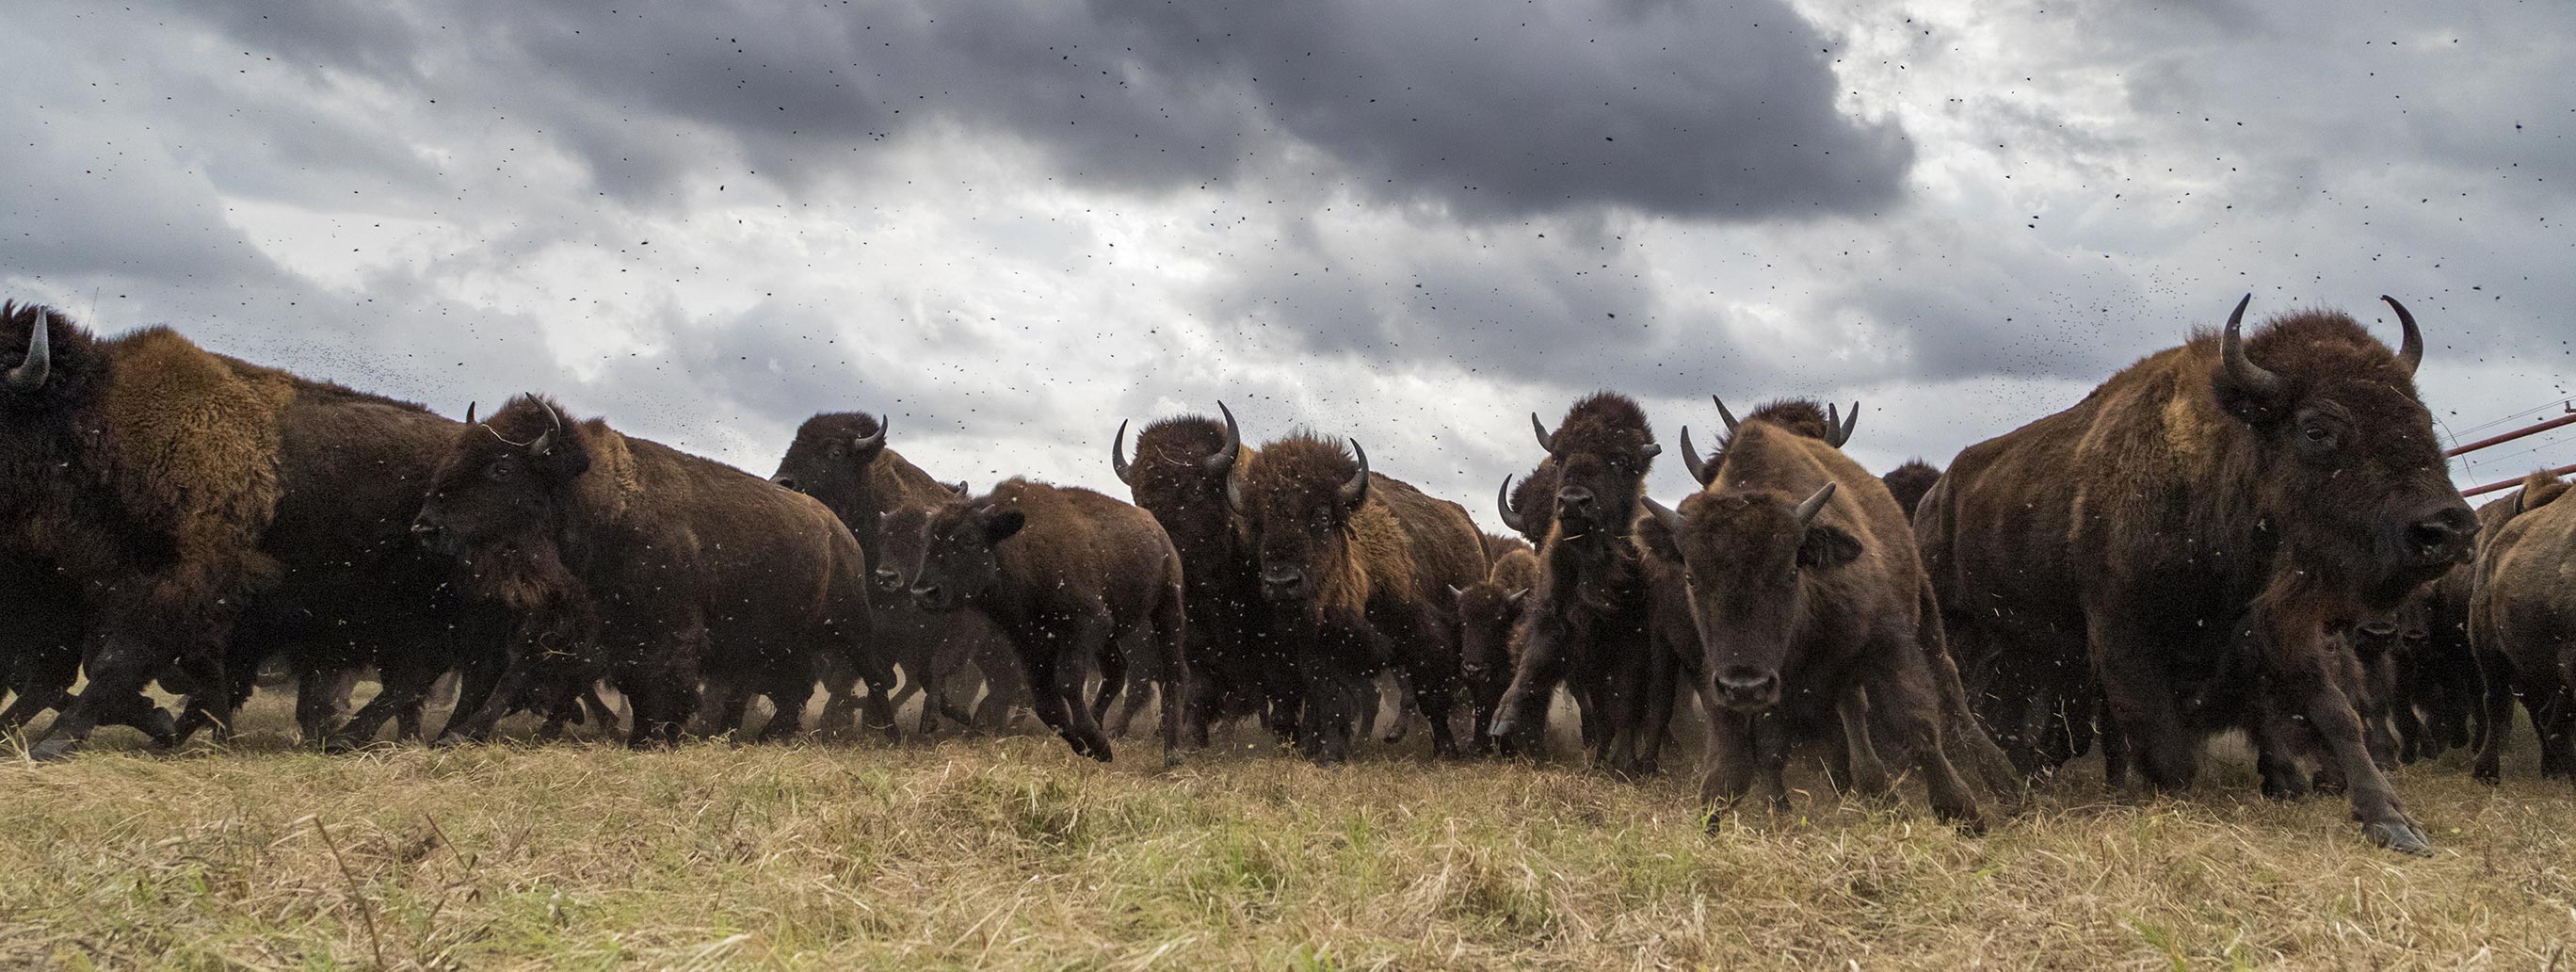 American Bison - Near Extinction and Conservation